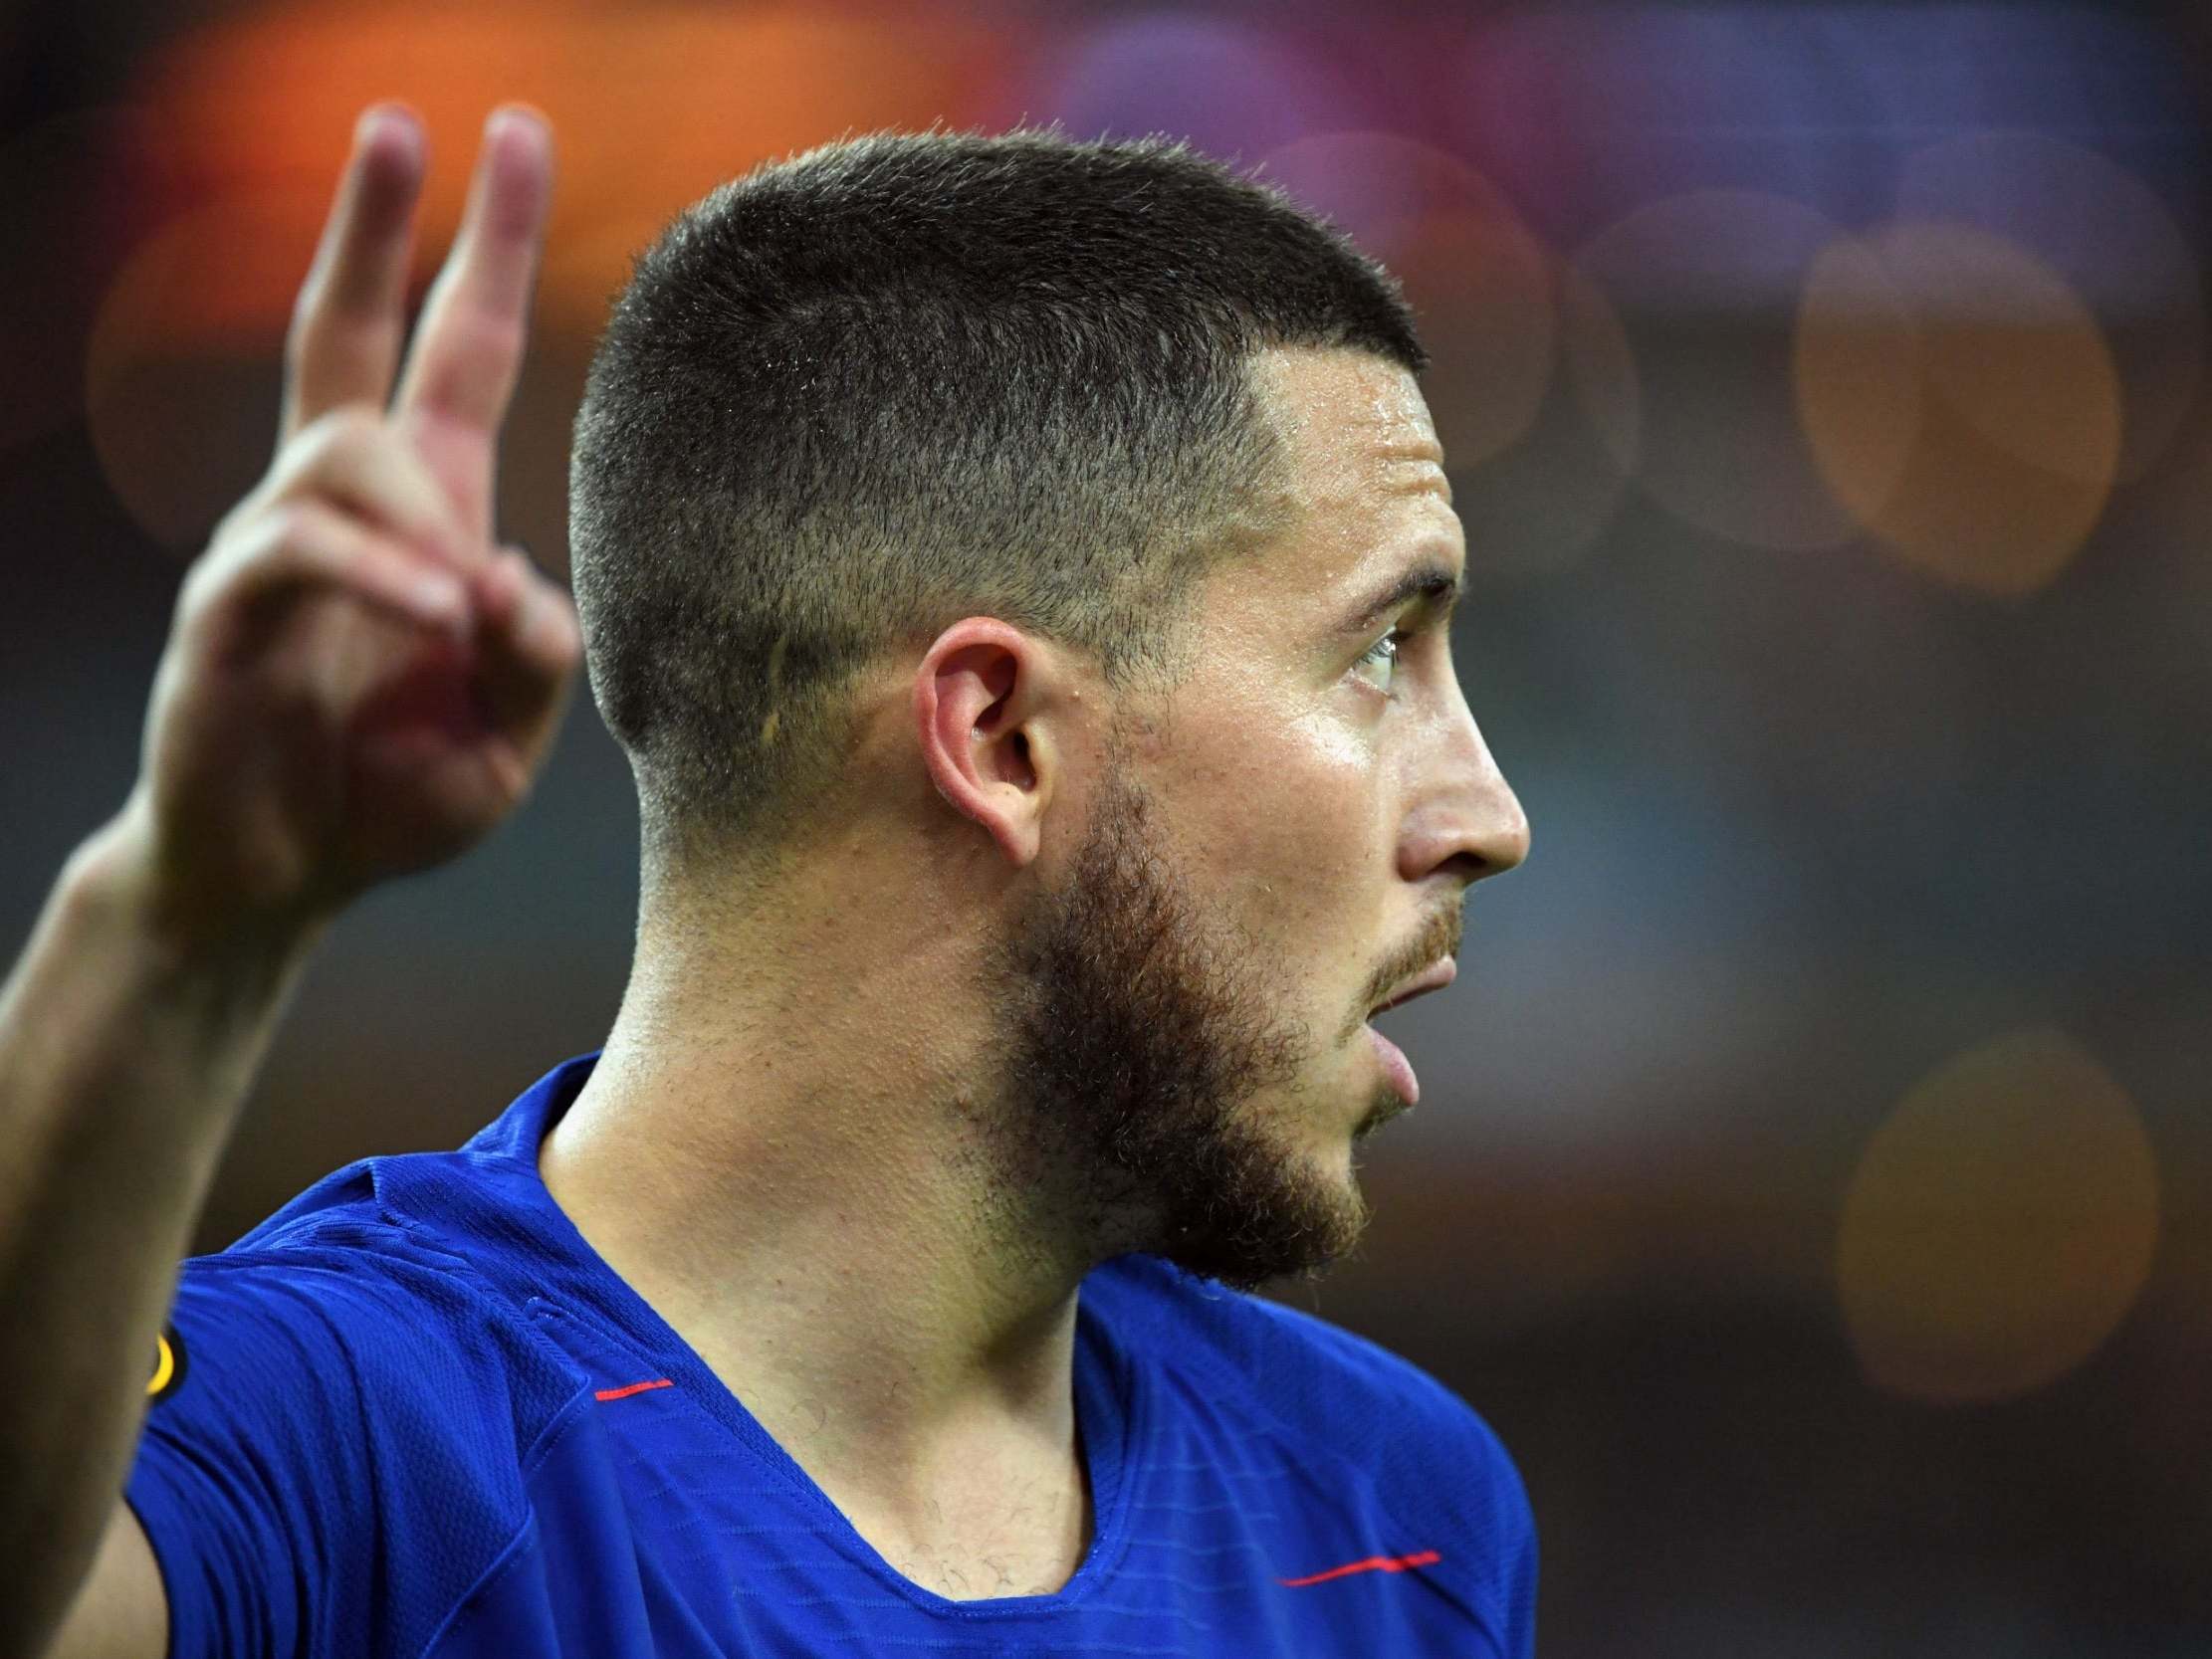 Chelsea vs Arsenal result: Eden Hazard says he 'thinks it's goodbye' after Europa League final victory